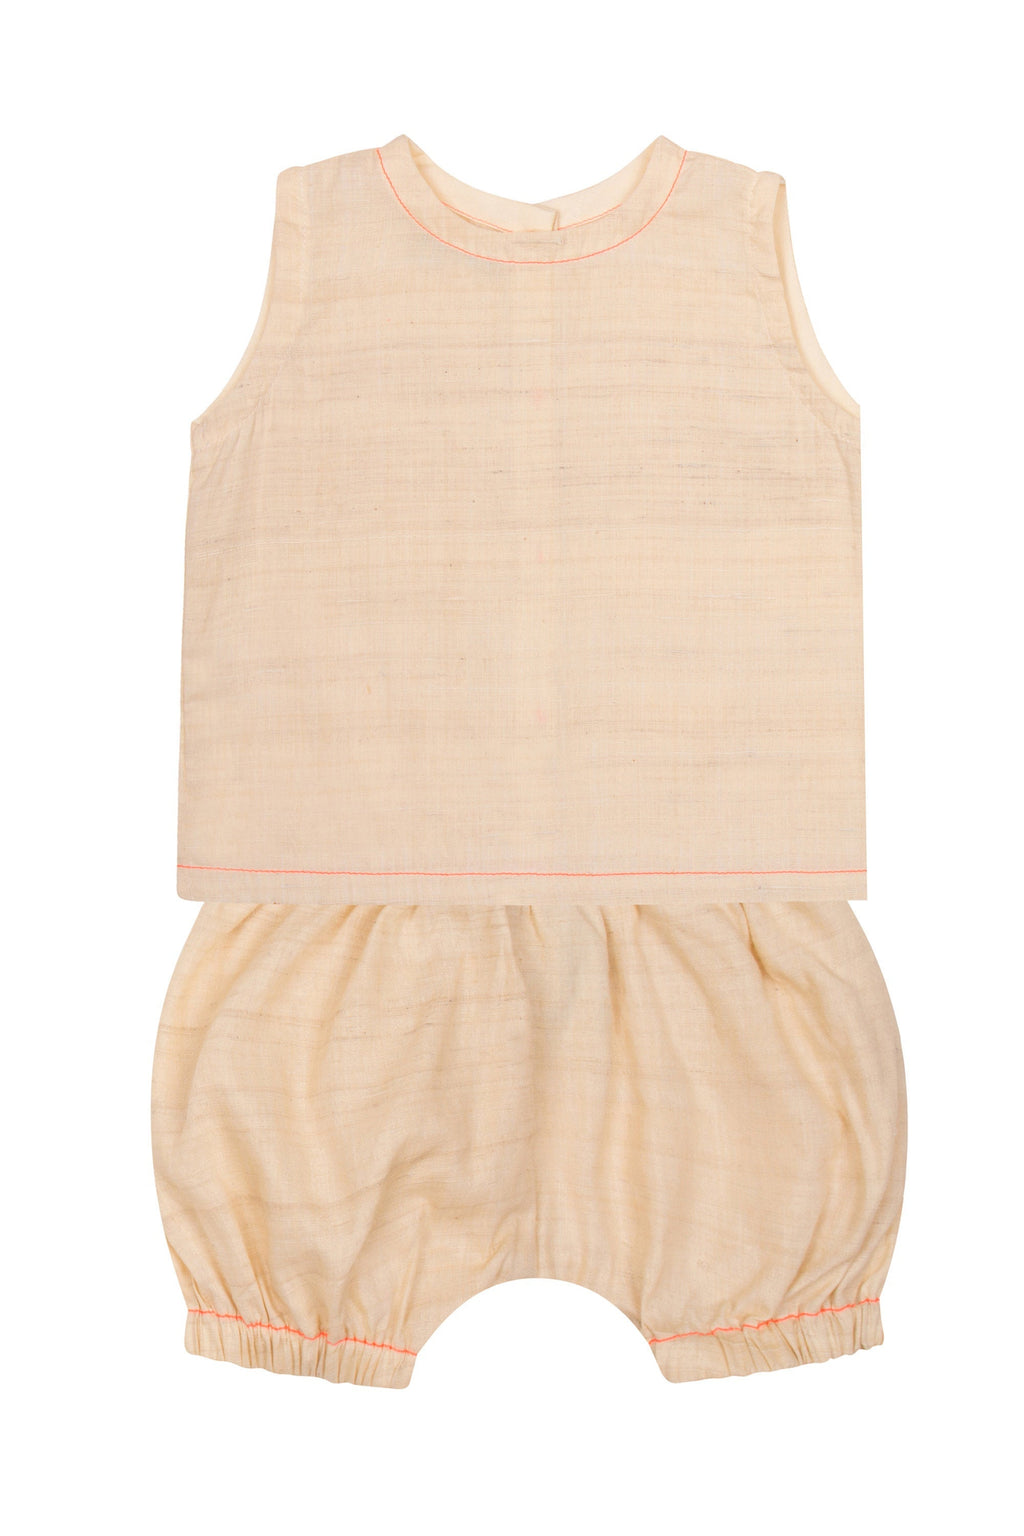 silk cotton handloom vest and pants set with neon stitching detail and buttons at the back.  perfect beachwear for baby